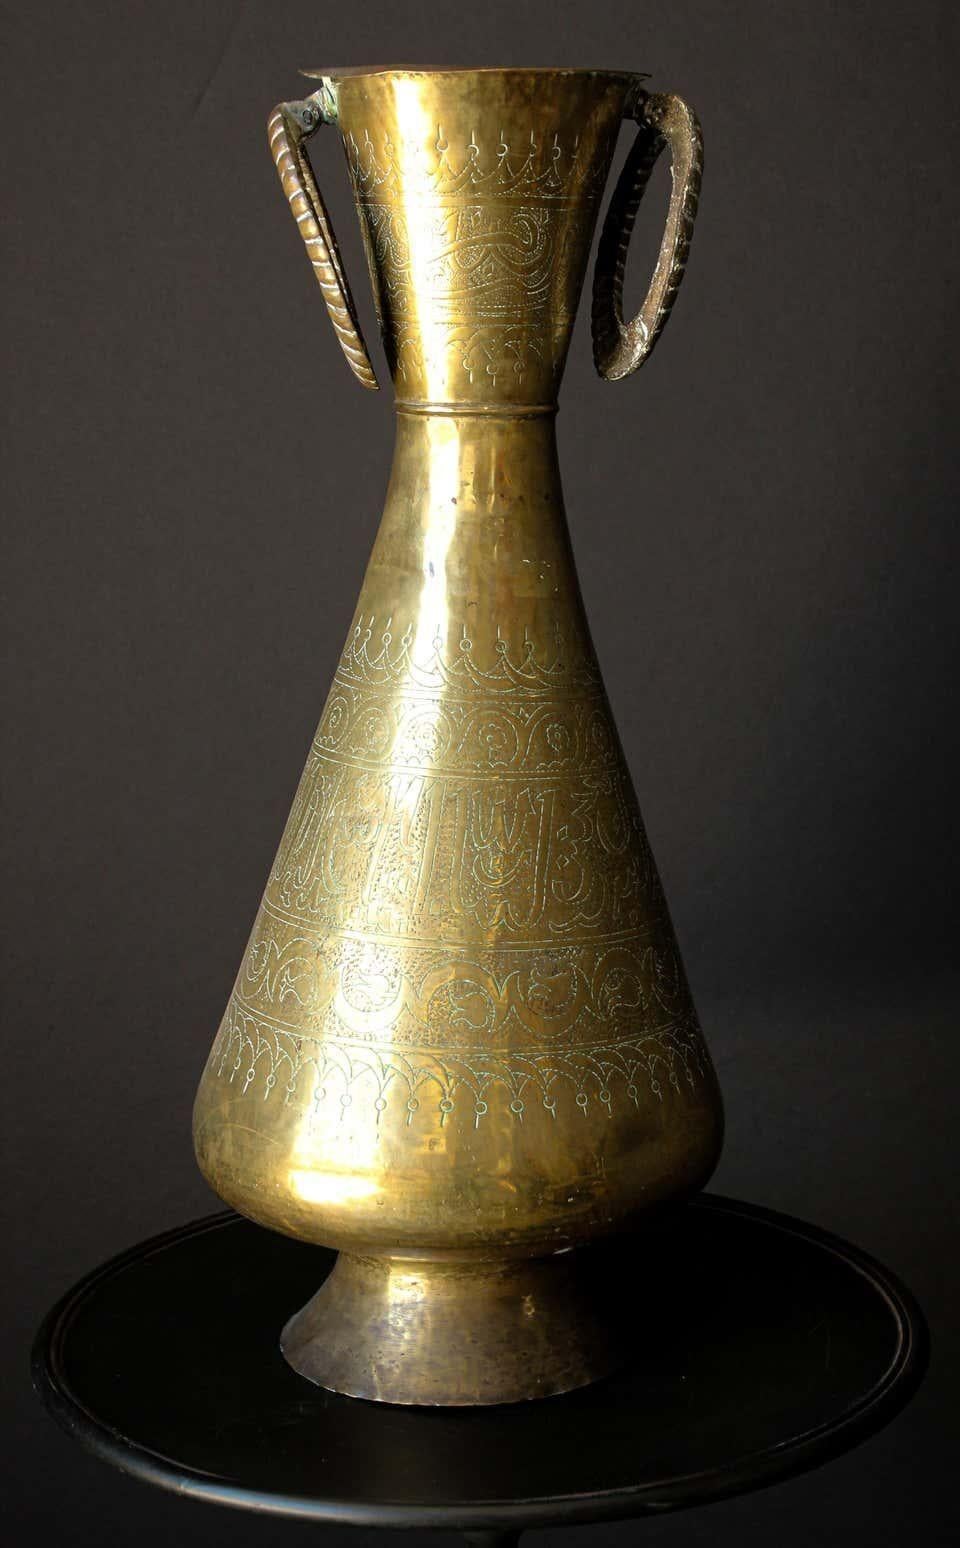 Arabian Middle Eastern Brass Islamic Art Vase Engraved With Arabic Calligraphy For Sale 1